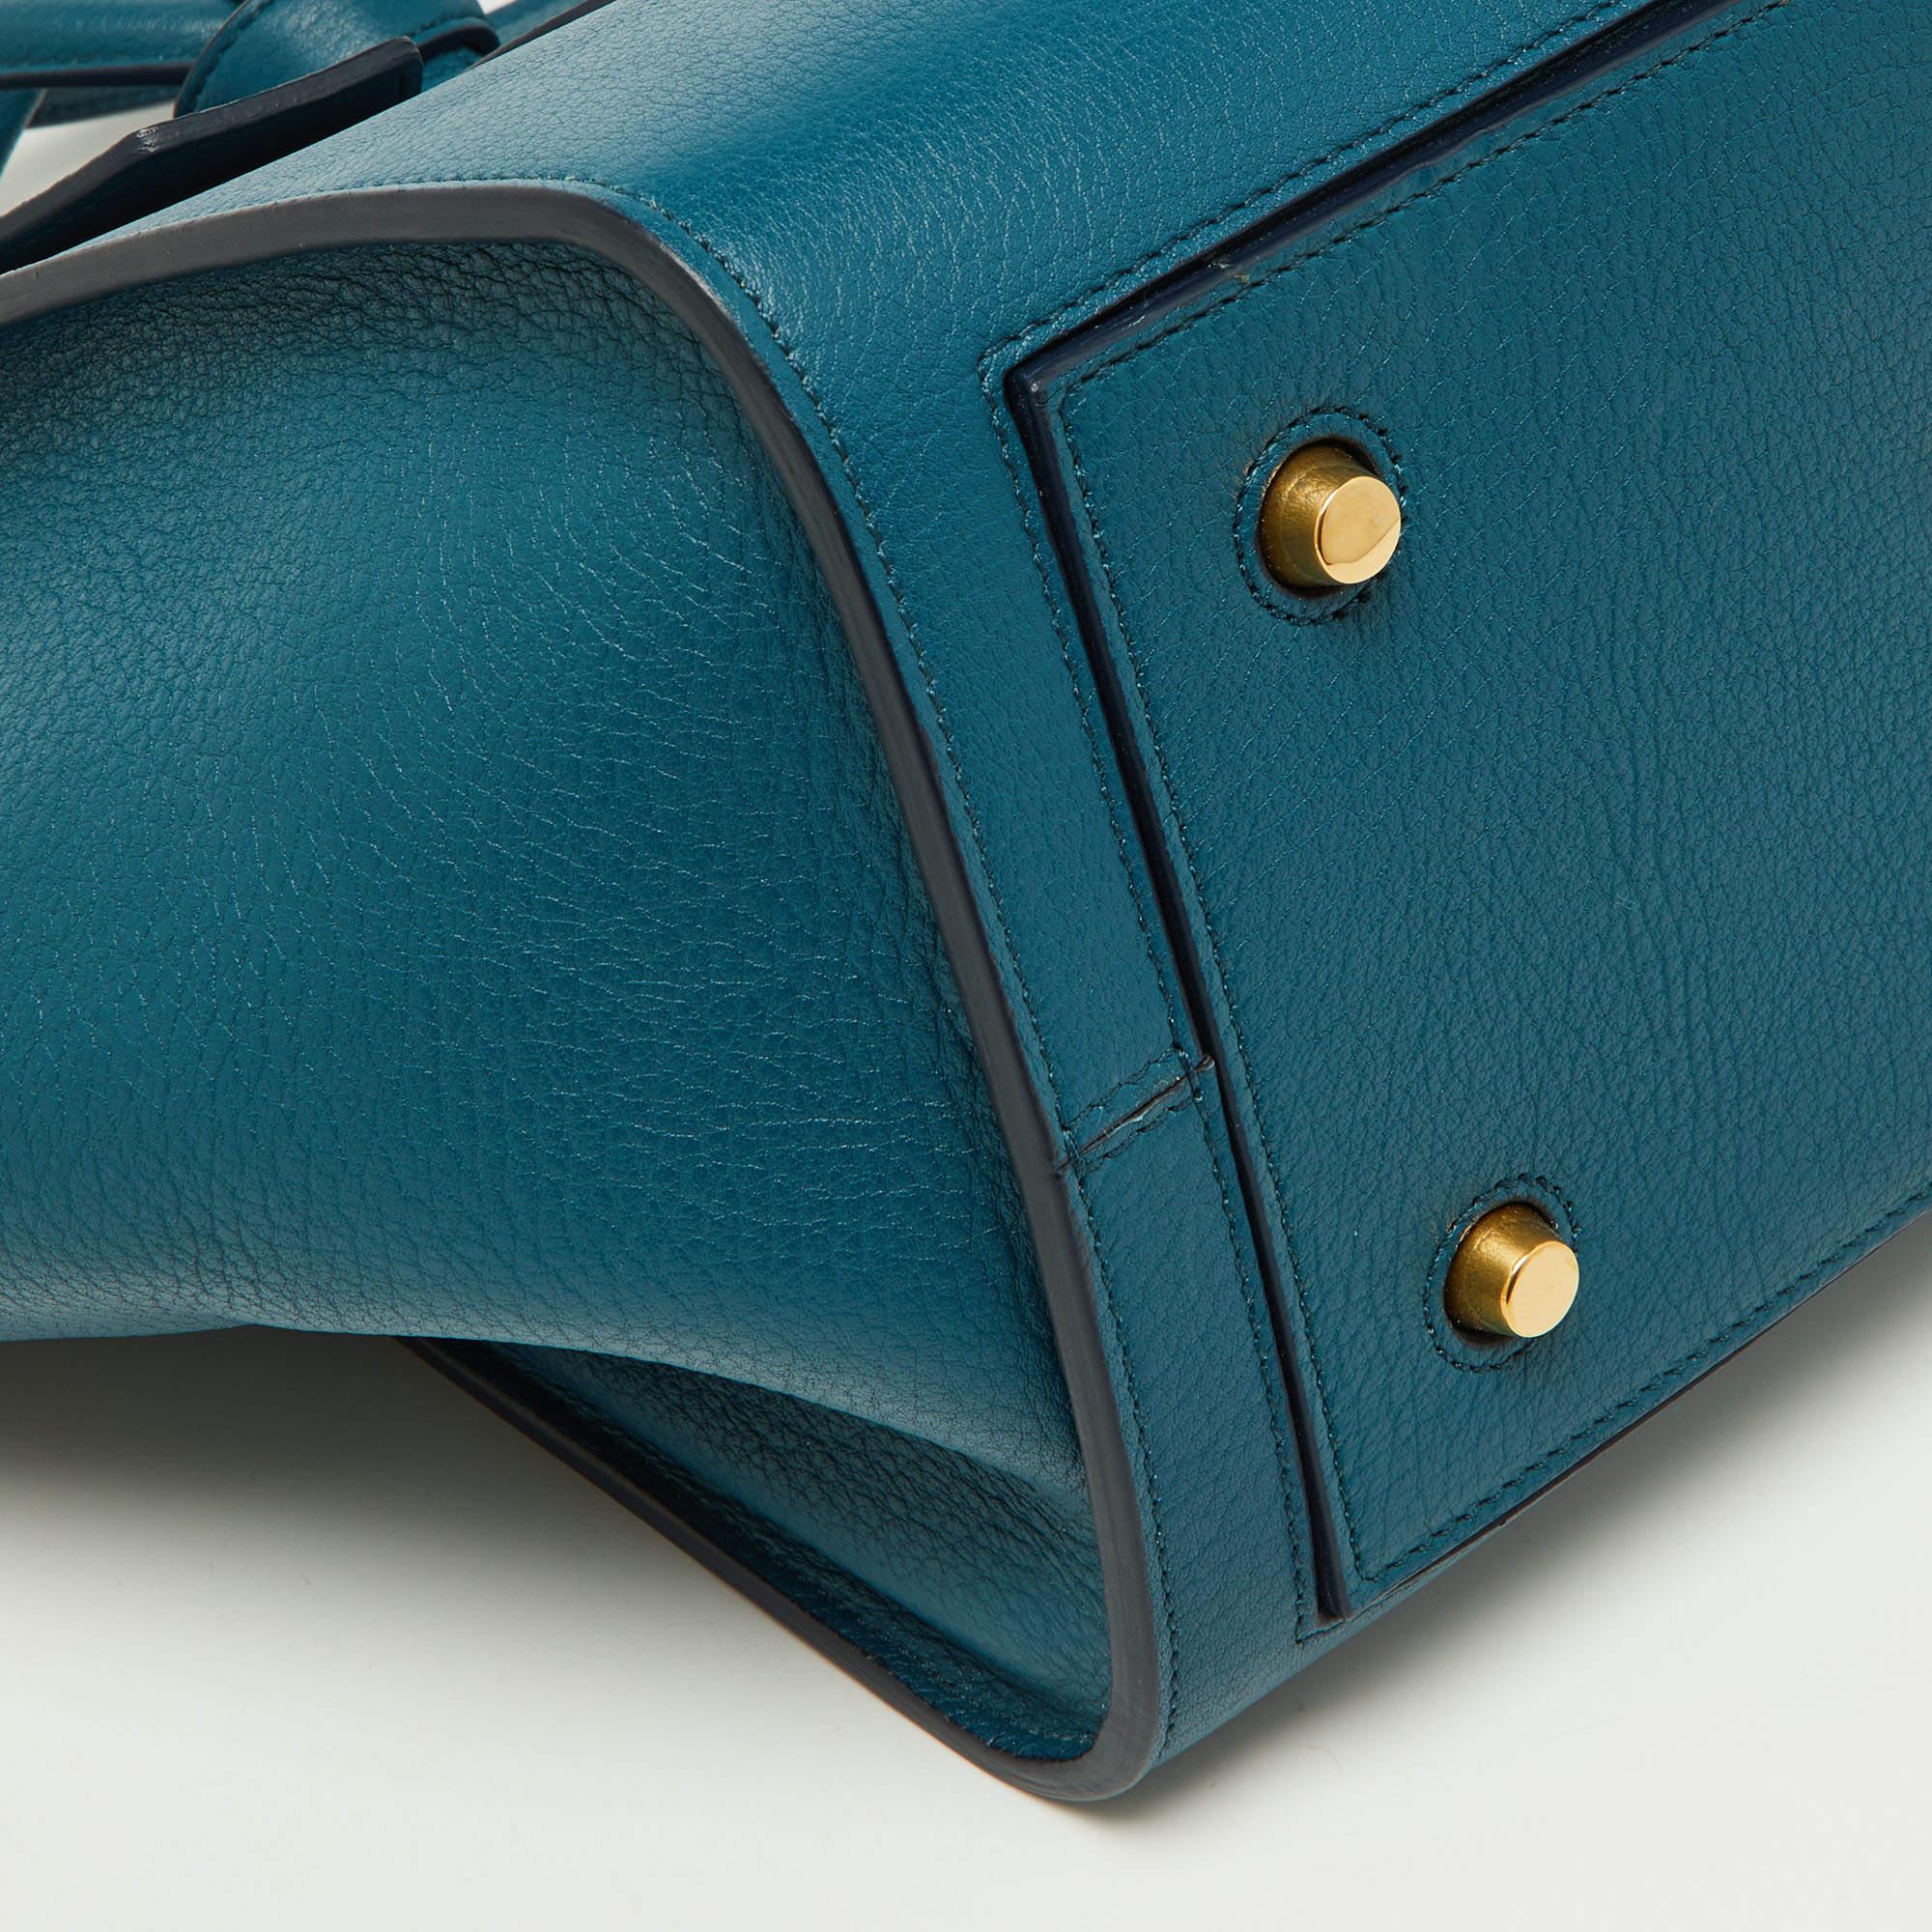 Celine Teal Blue Leather Small Tie Tote For Sale 2